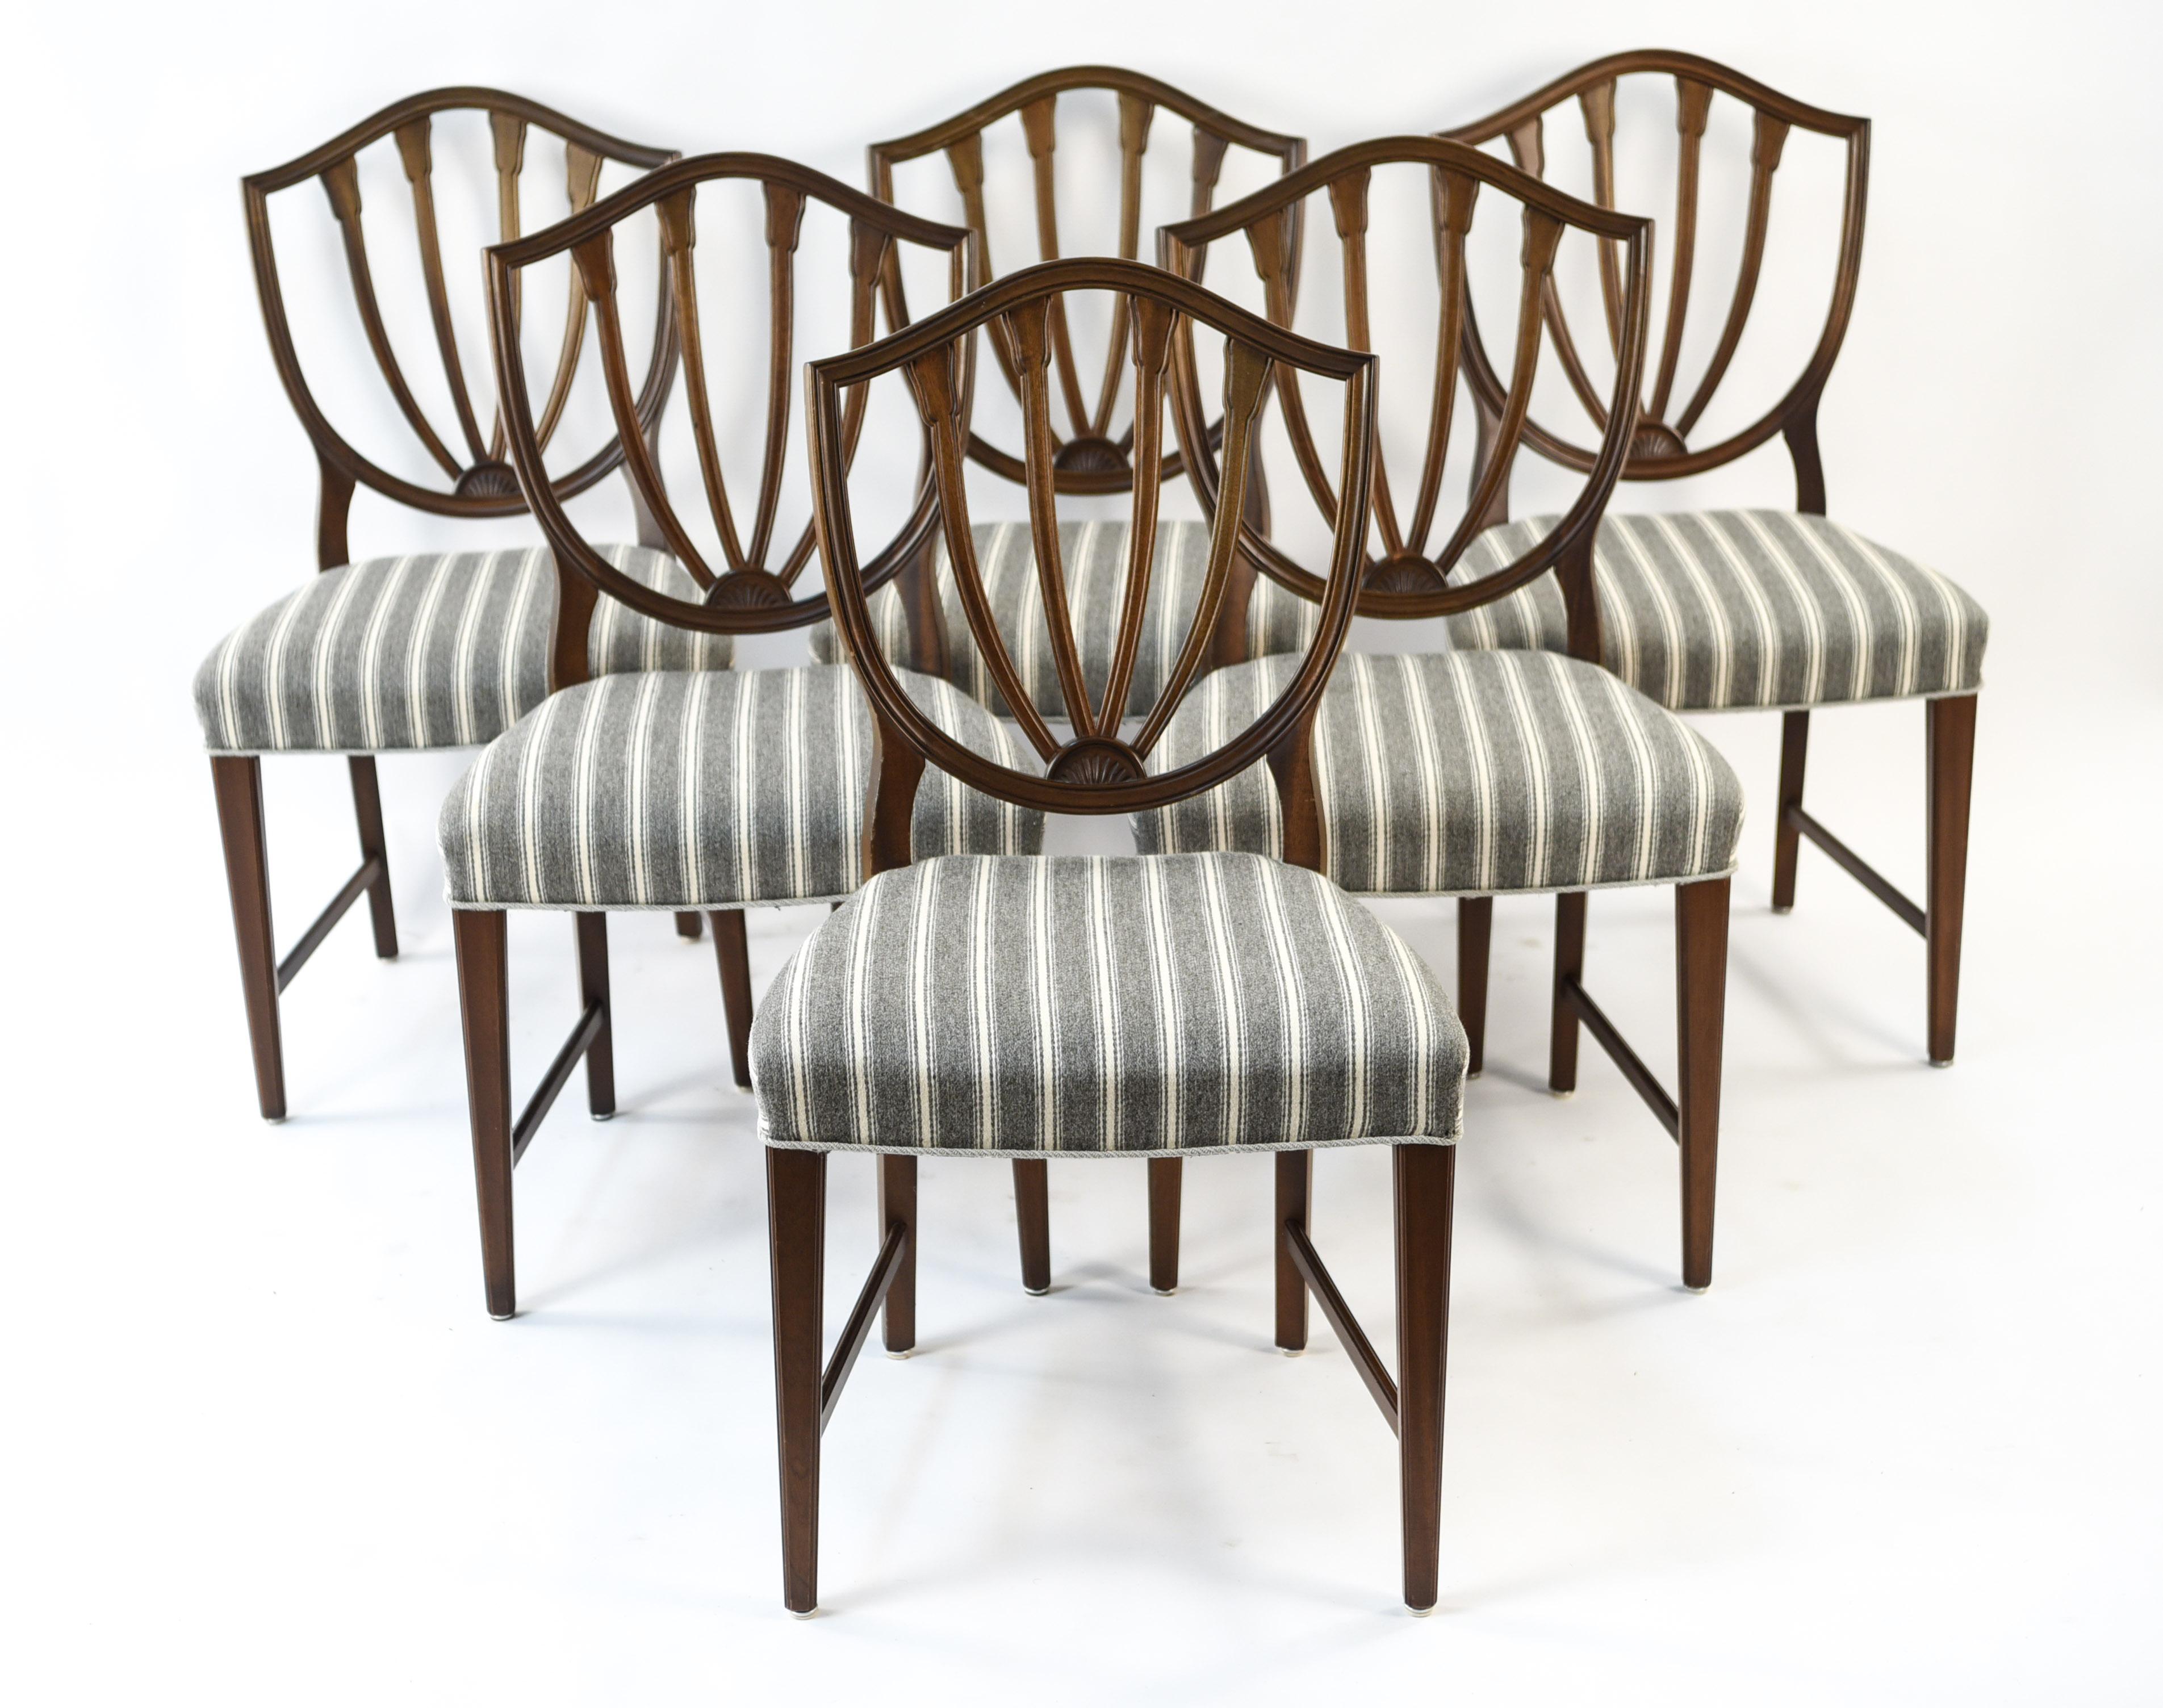 This is a beautiful vintage set of six English dining chairs in the Hepplewhite style featuring the characteristic shield back design. This set is a great way to incorporate a timeless design into a contemporary dining space.